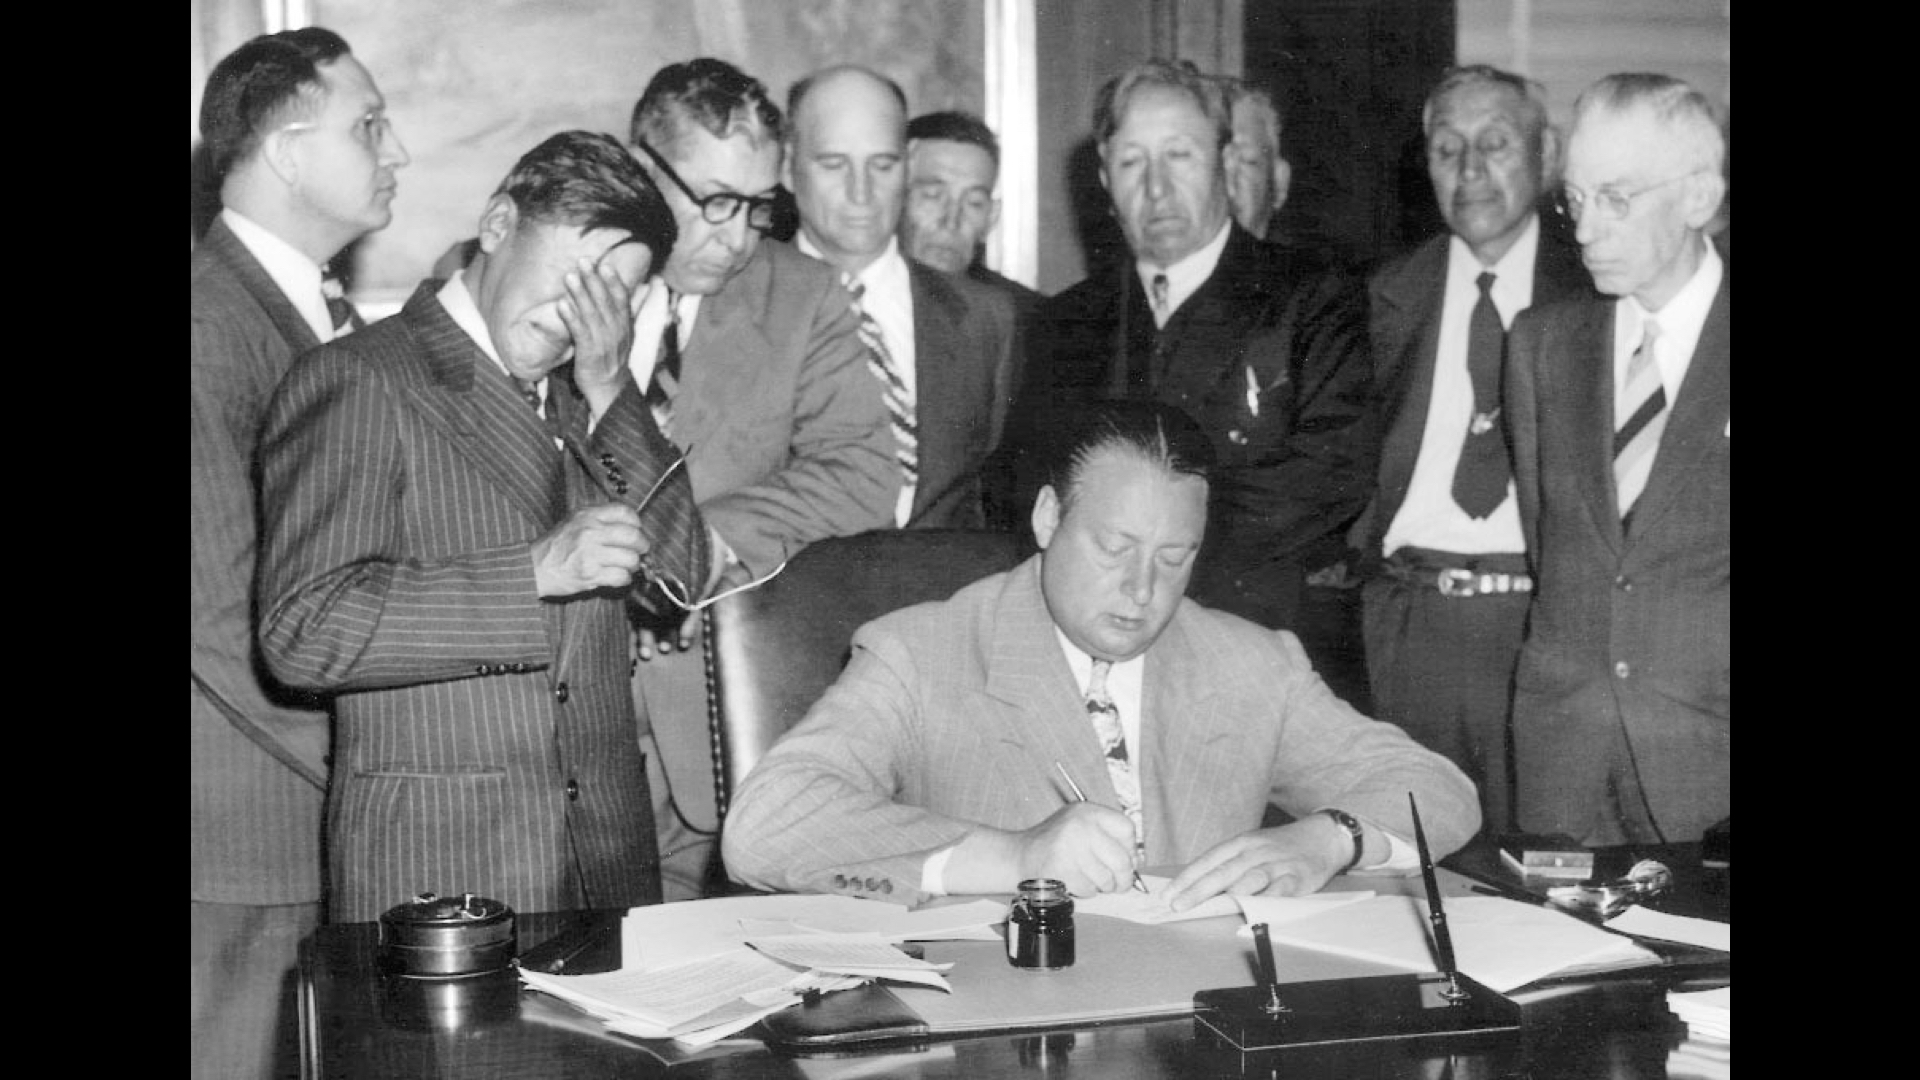 U.S. officials and representatives of the Three Affiliated Tribes (Hidatsa, Mandan, and Arikara) sign the Garrison Dam agreement on May 20, 1948. Secretary of the Interior Julius Krug writing his name while tribal chairman George Gillette sobs into his hand.